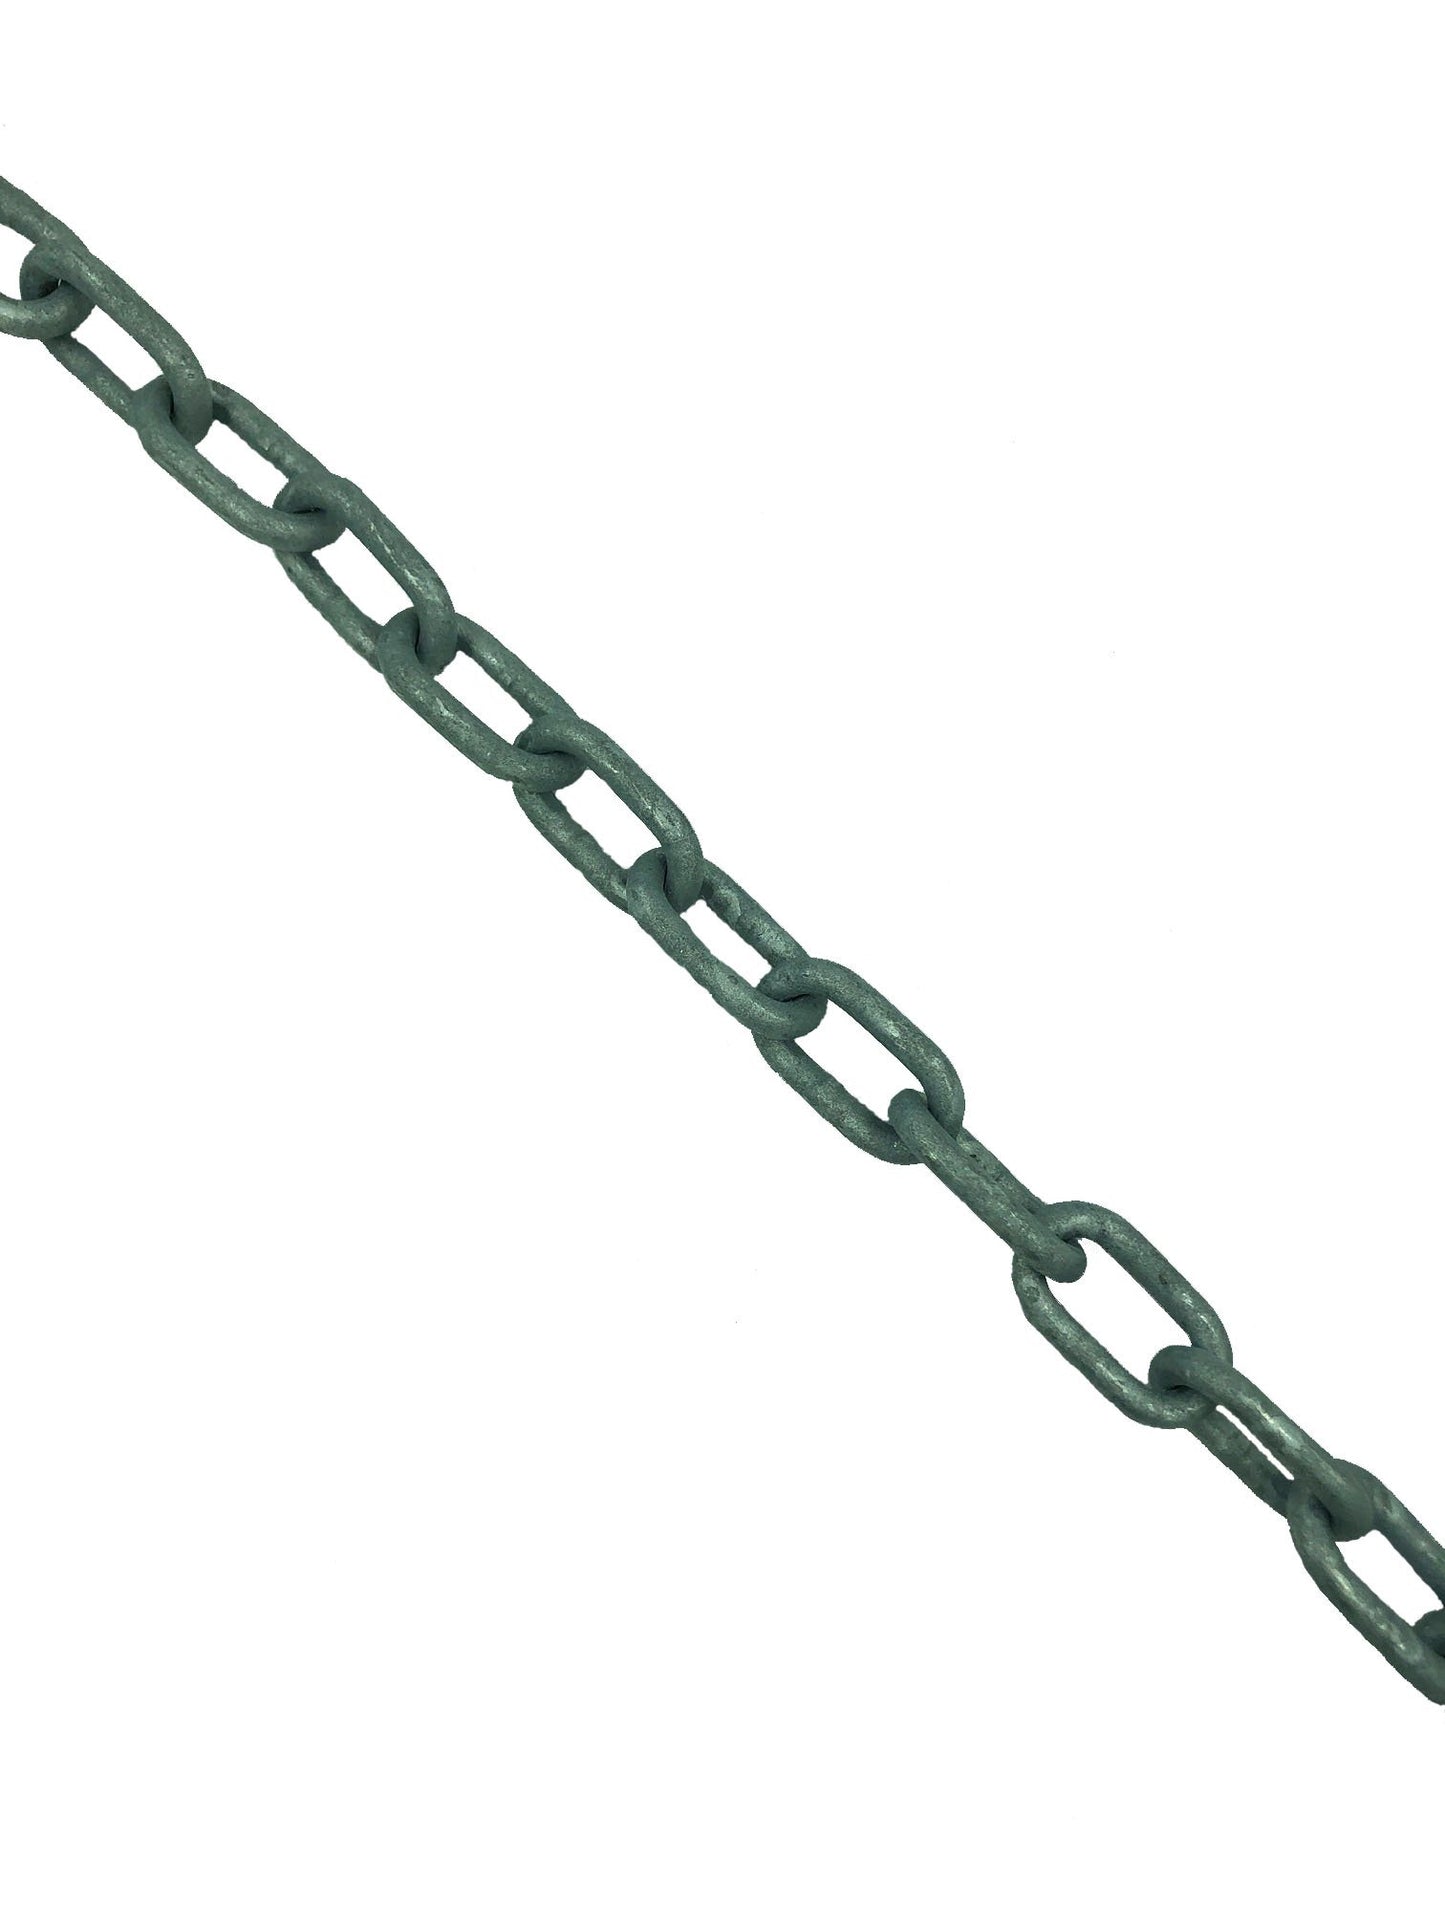 5/16" Grade 30 Galvanized Anchor Chain (By-The-Foot)